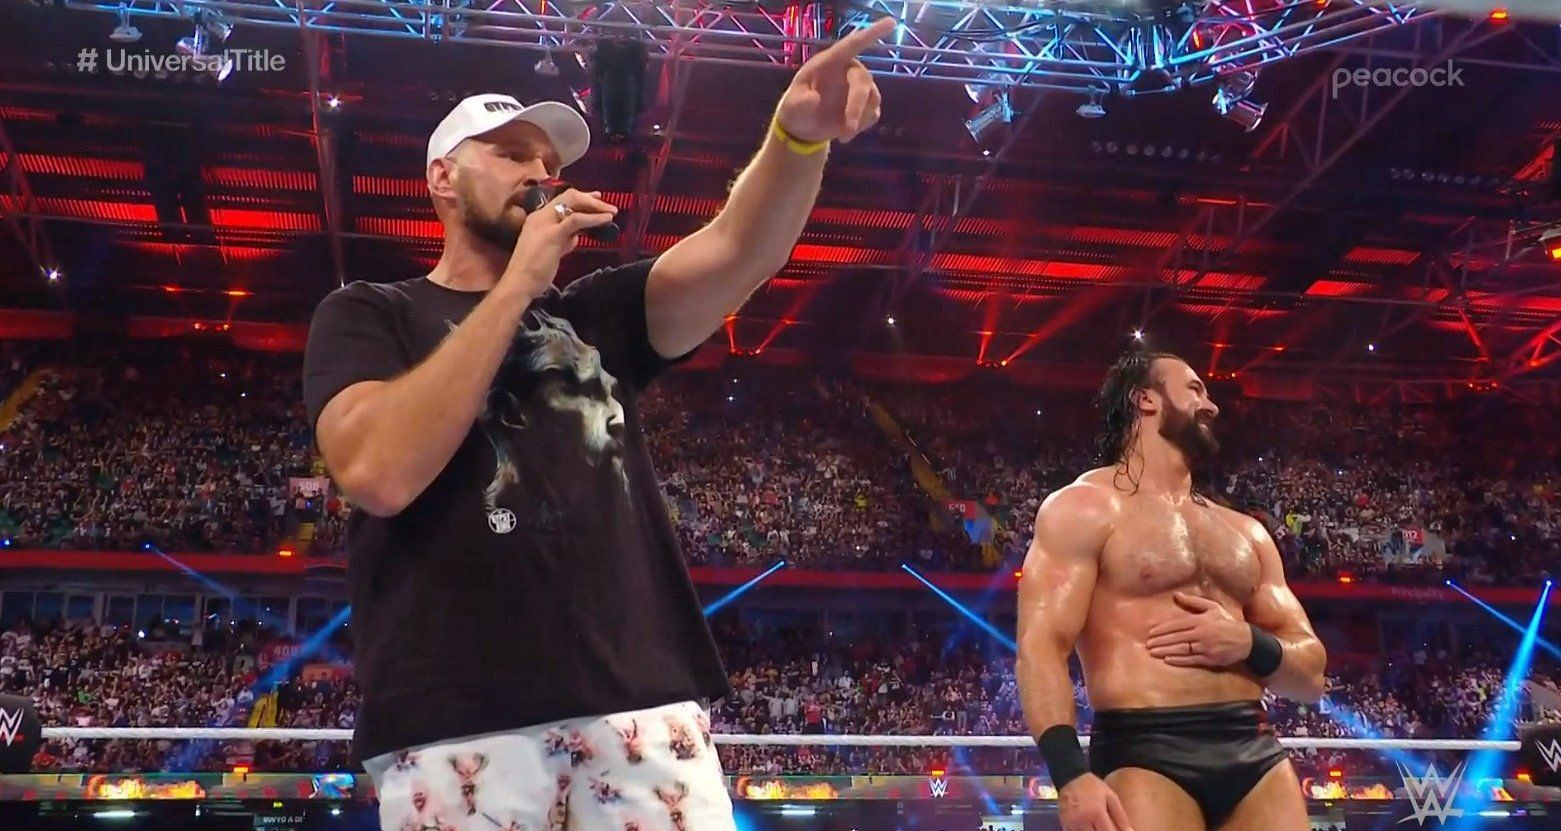 Drew McIntyre and Tyson Fury serenaded the crowd to close out Clash at the Castle